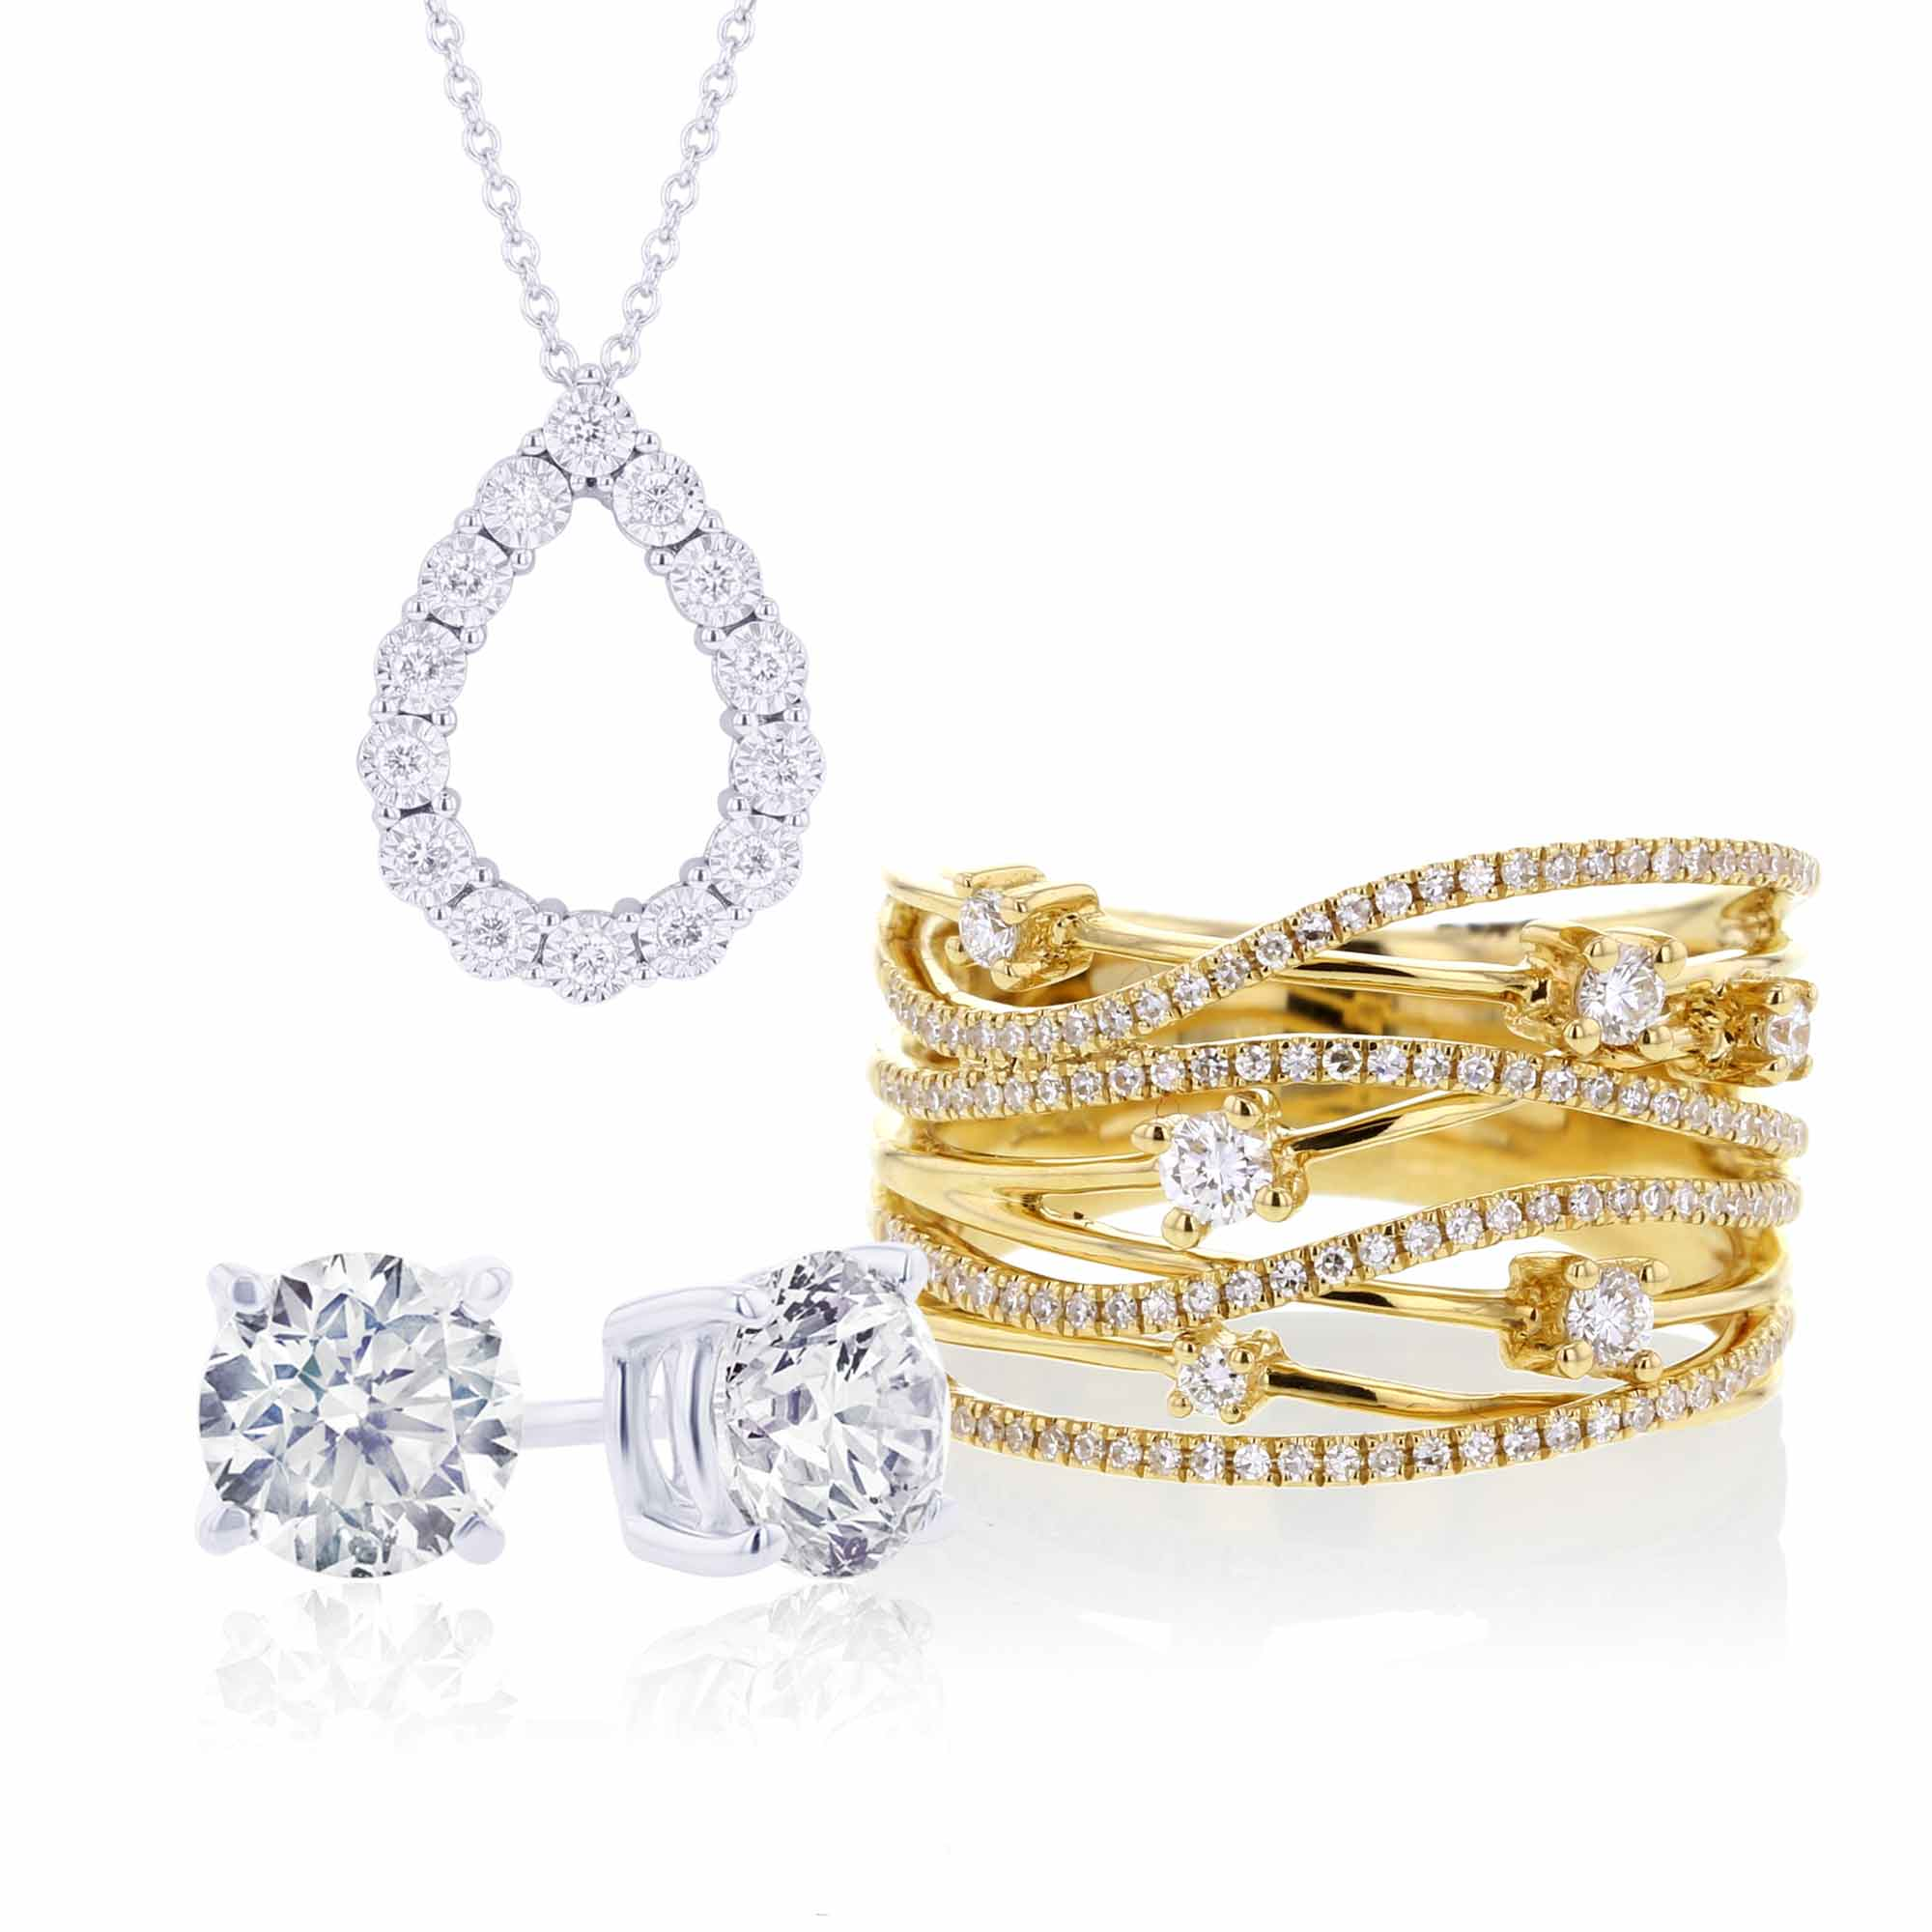 An image of feautred products in our Anniversary Collection including a teardrop diamond necklace, layered gold diamond right hand ring, diamond stud earrings and more.